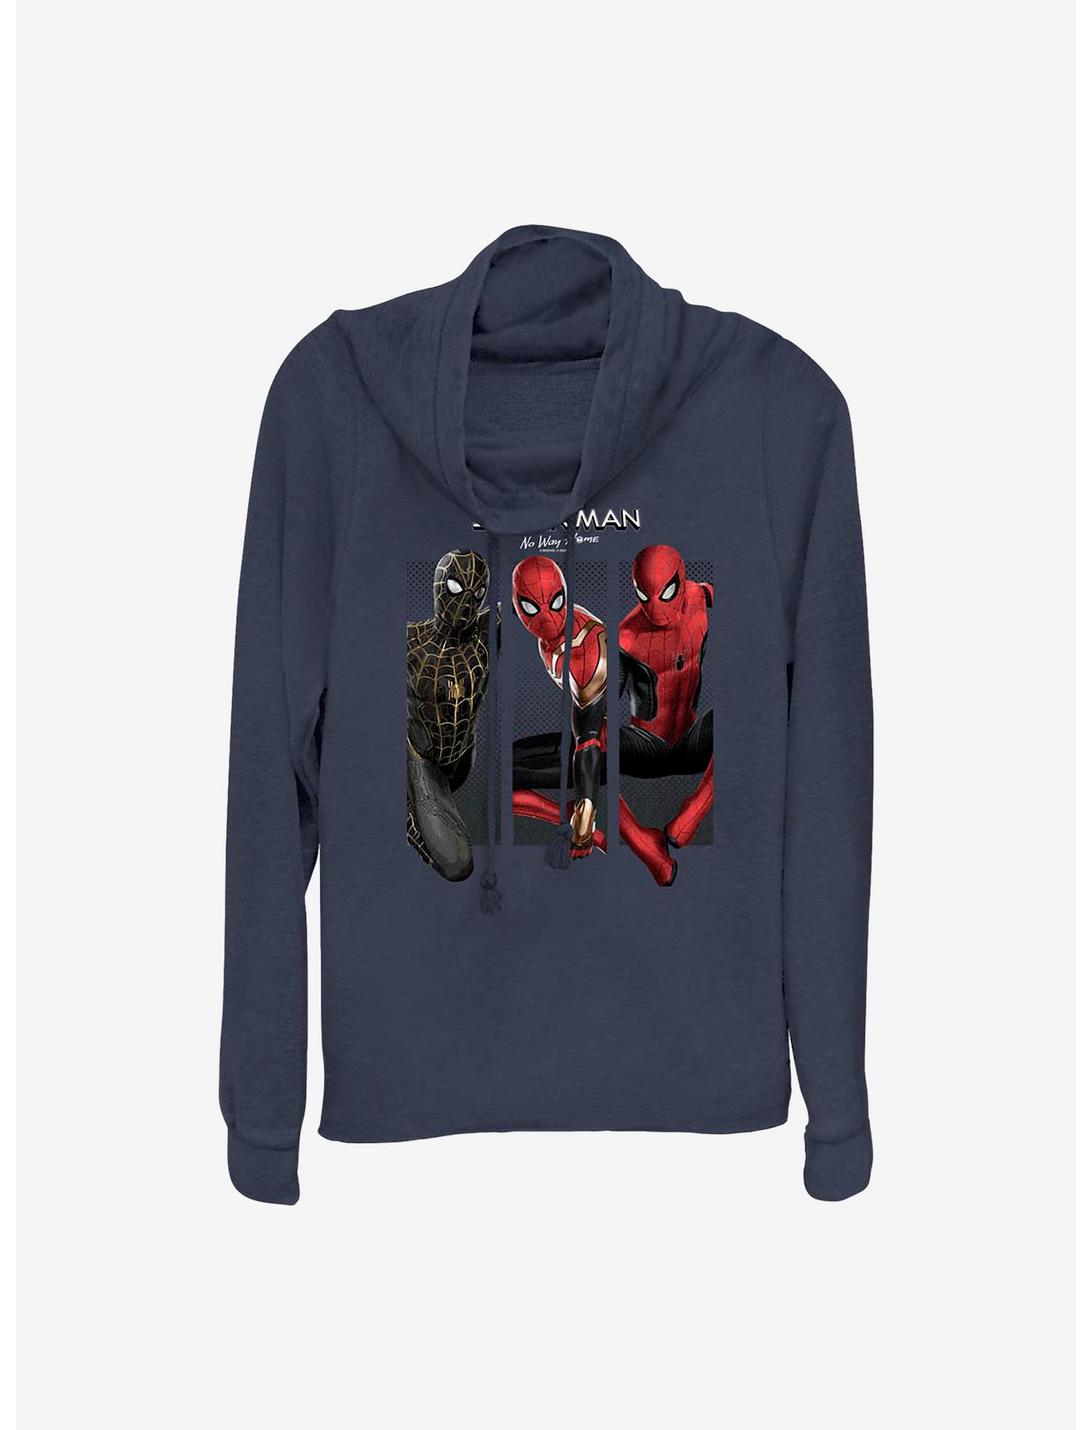 Marvel Spider-Man: No Way Home Three Poses Cowlneck Long-Sleeve Girls Top, NAVY, hi-res